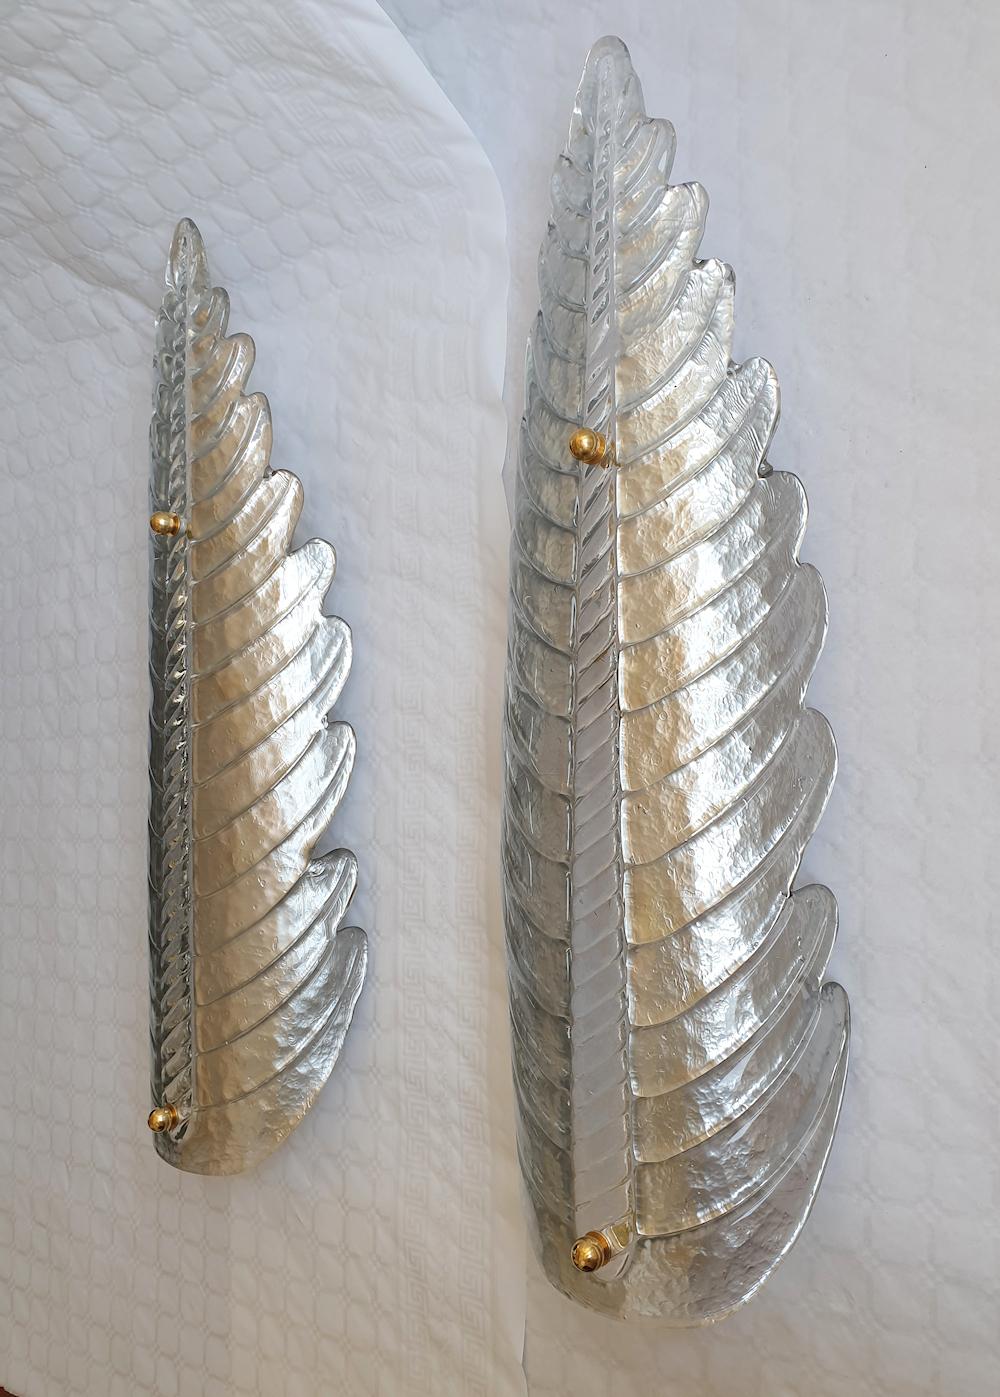 Very large pair of Mid-Century Modern Murano glass wall sconces, attributed to Barovier & Toso, Italy 1970s.
The vintage leaf shaped sconces are made of a single handmade Murano glass, in a silver color, with a transparent glass center rod and brass